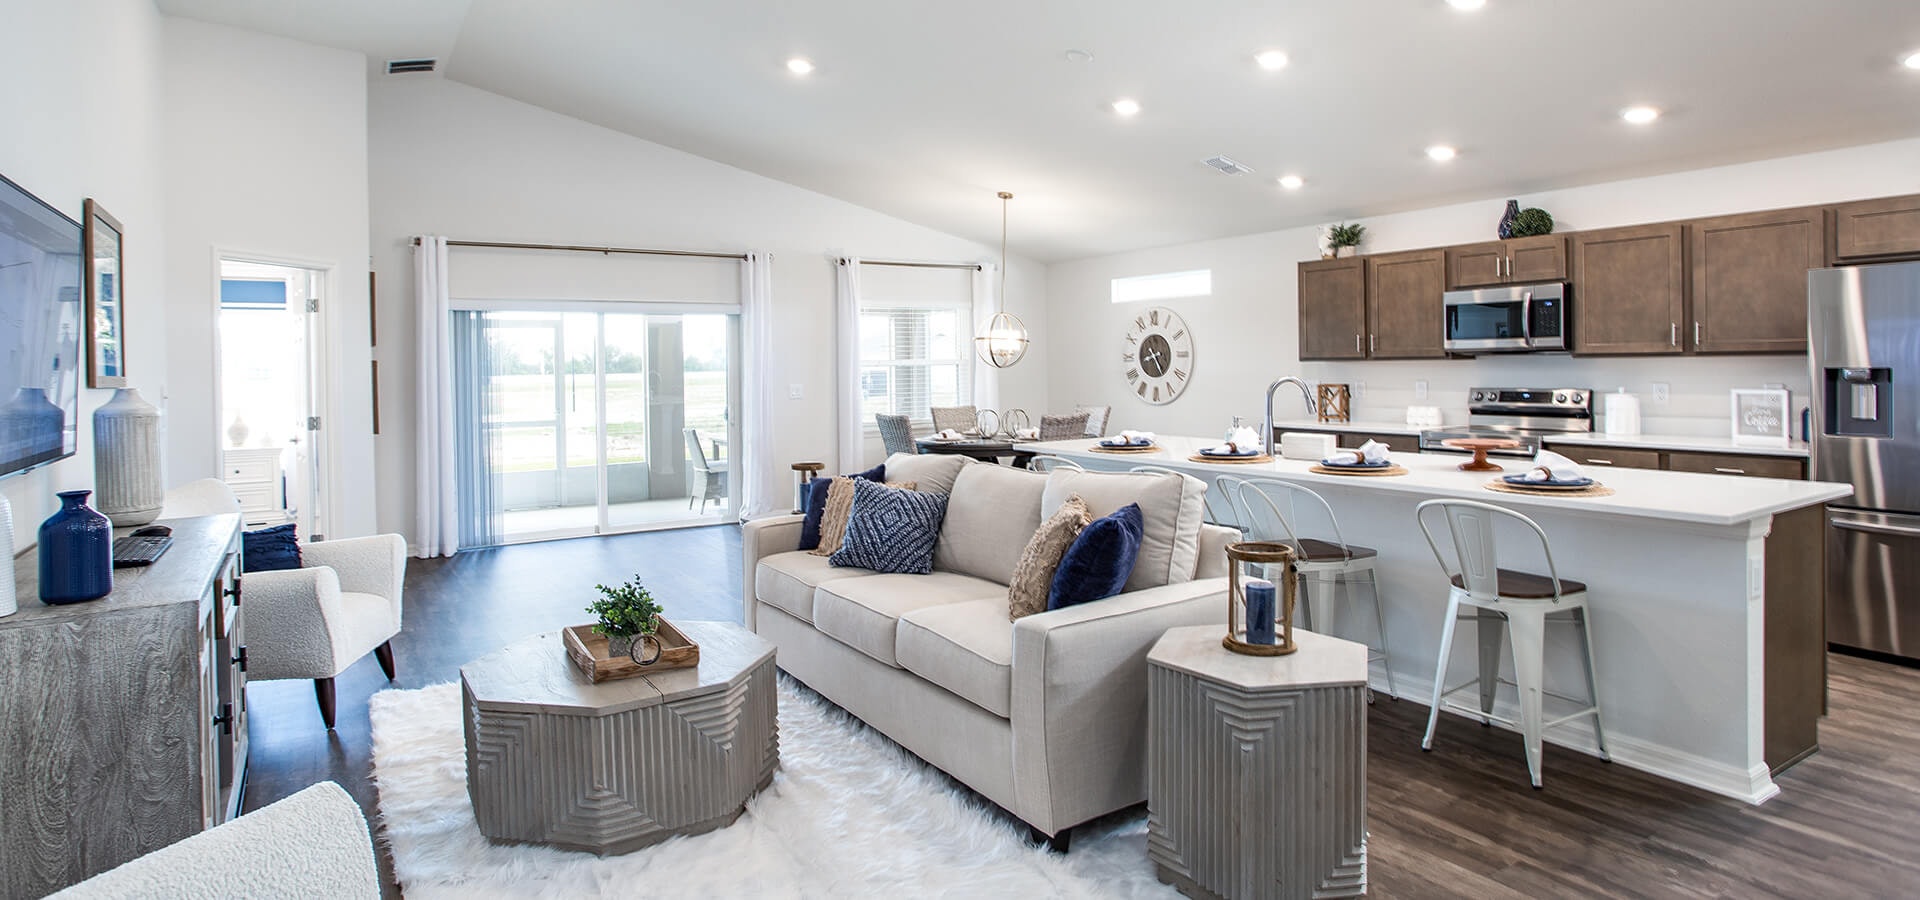 The Serendipity by Highland Homes, a new home in Auburndale, FL